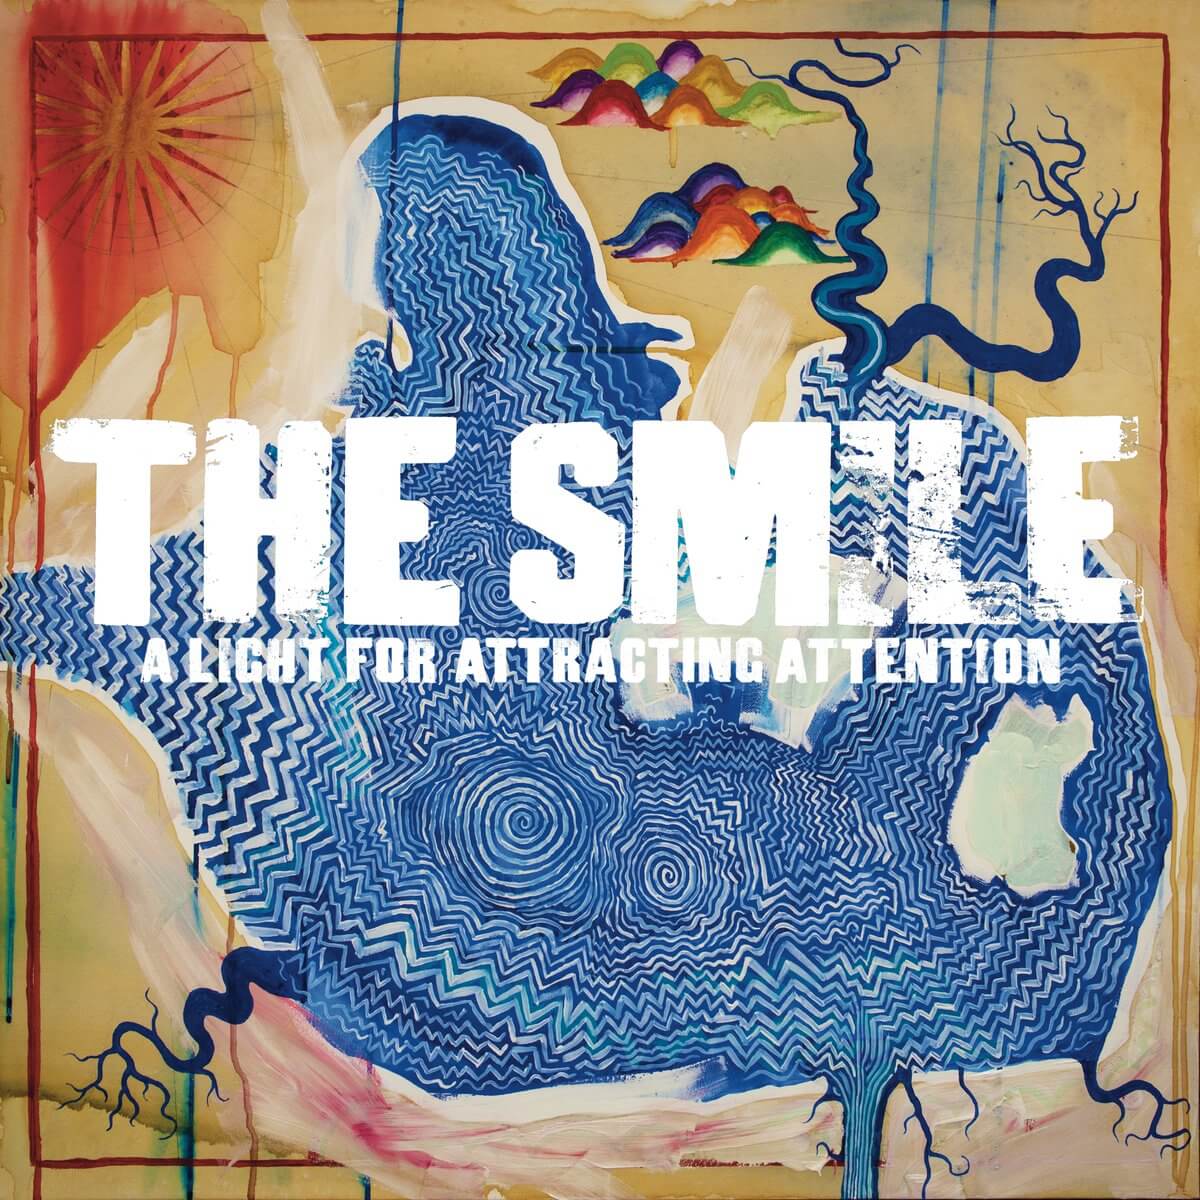 The Smile- A Light For Attracting Attention